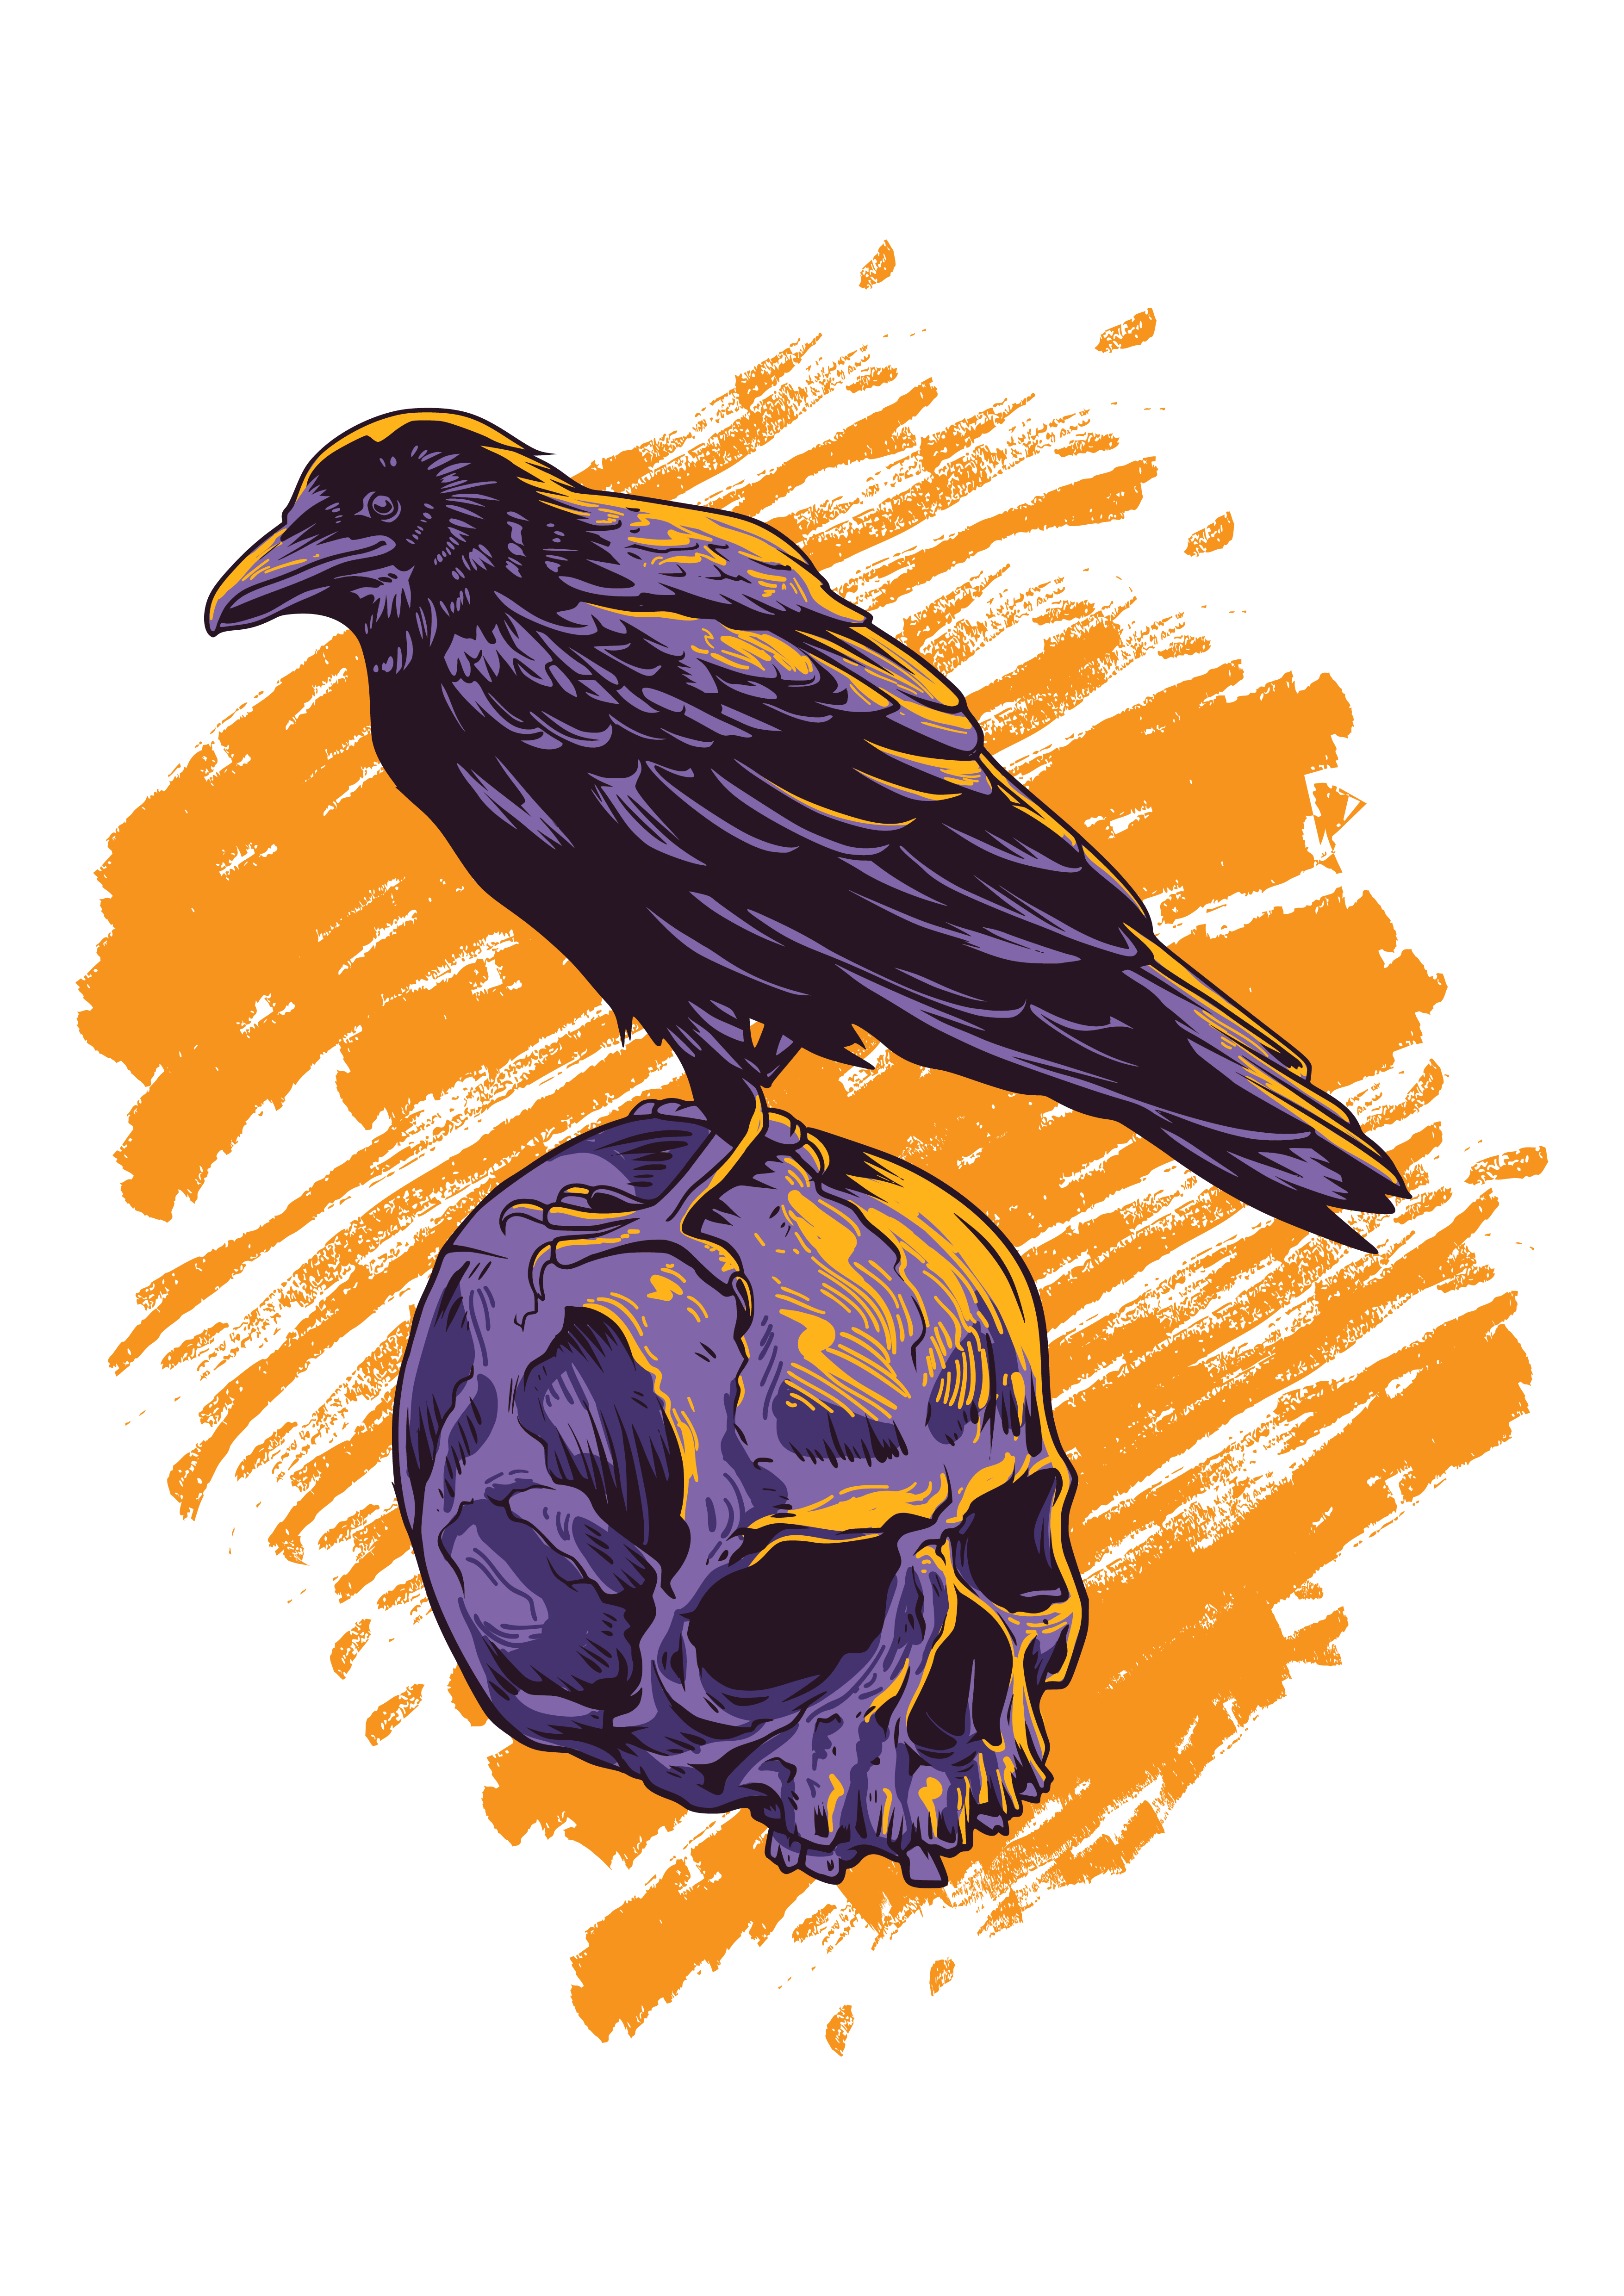 RAVEN PERCHED ON SKULL PNG GRAPHIC DESIGN